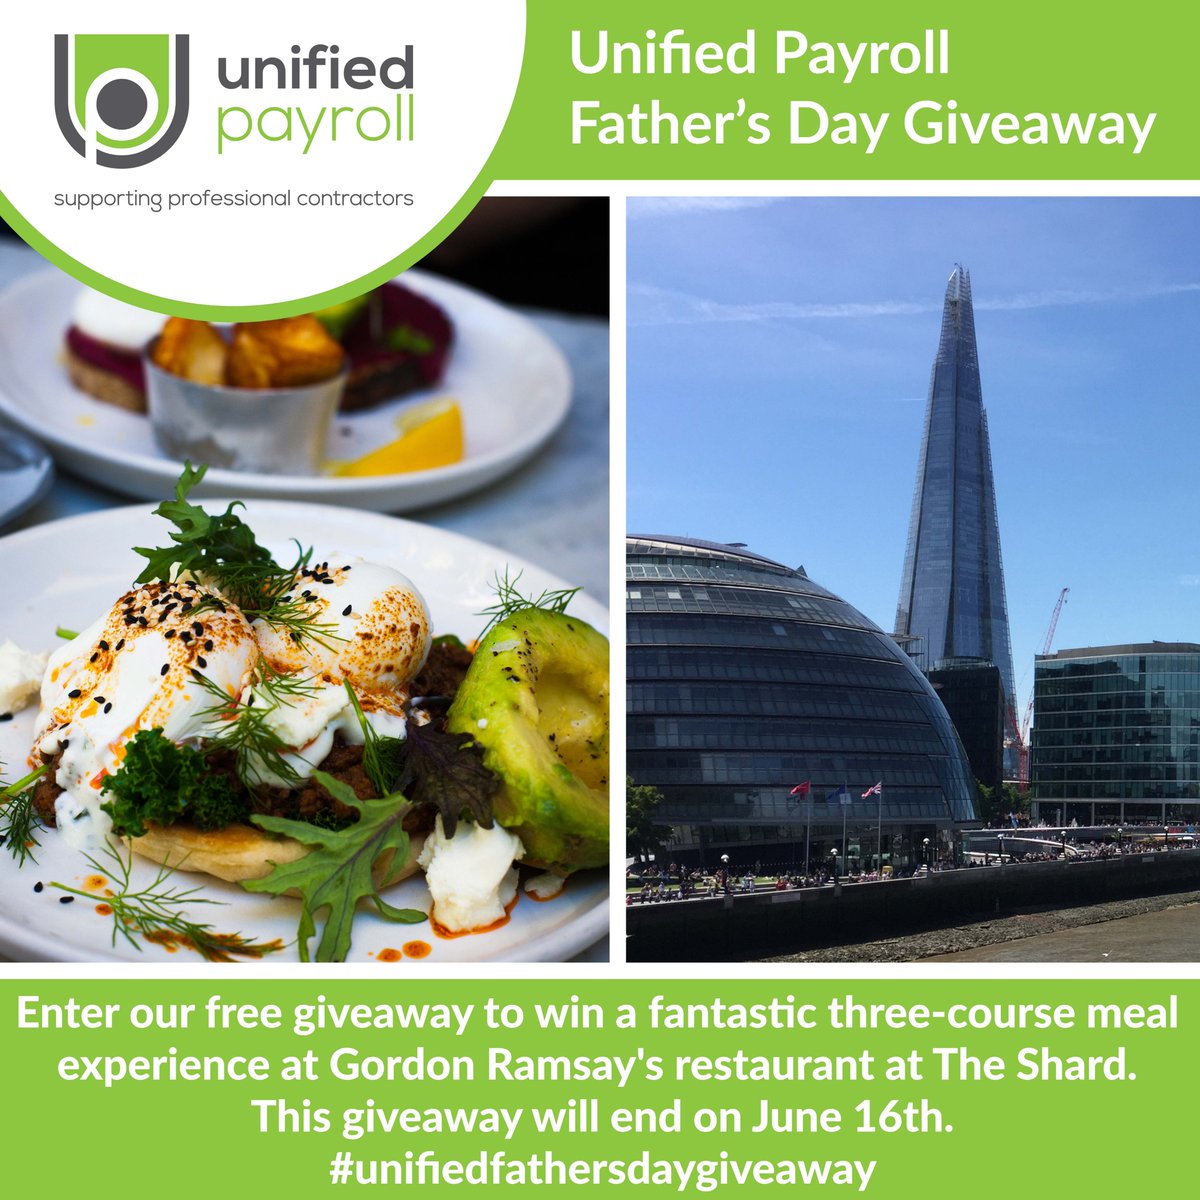 One lucky winner will win a three-course meal experience at Gordon Ramsay’s restaurant at The Shard.
 
To enter our giveaway, simply:
 1. Like this post
 2. Follow @Unified_Payroll
 3. Tag 3 friends
Giveaway ends 16th June Midnight.
Giveaway prize is valid until 31 October 2021. https://t.co/08IYAlnMJ2